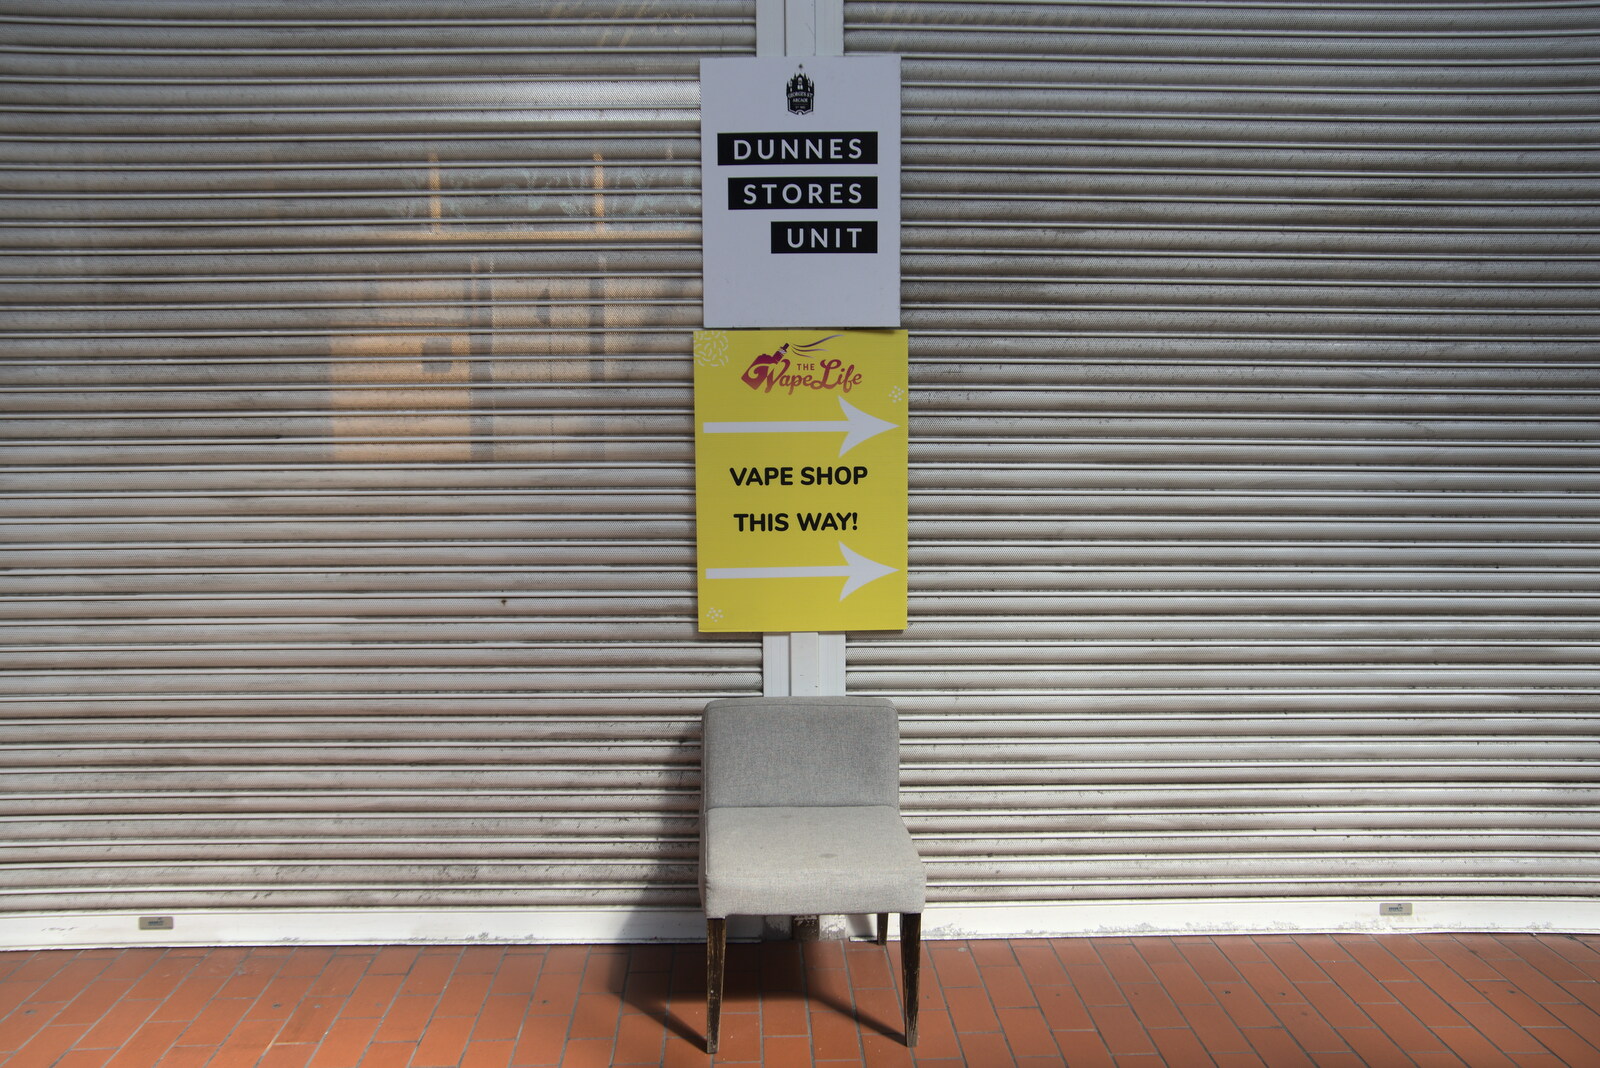 Blackrock North and South, Louth and County Dublin, Ireland - 23rd April 2022: A lonely chair and signs for a vape shop